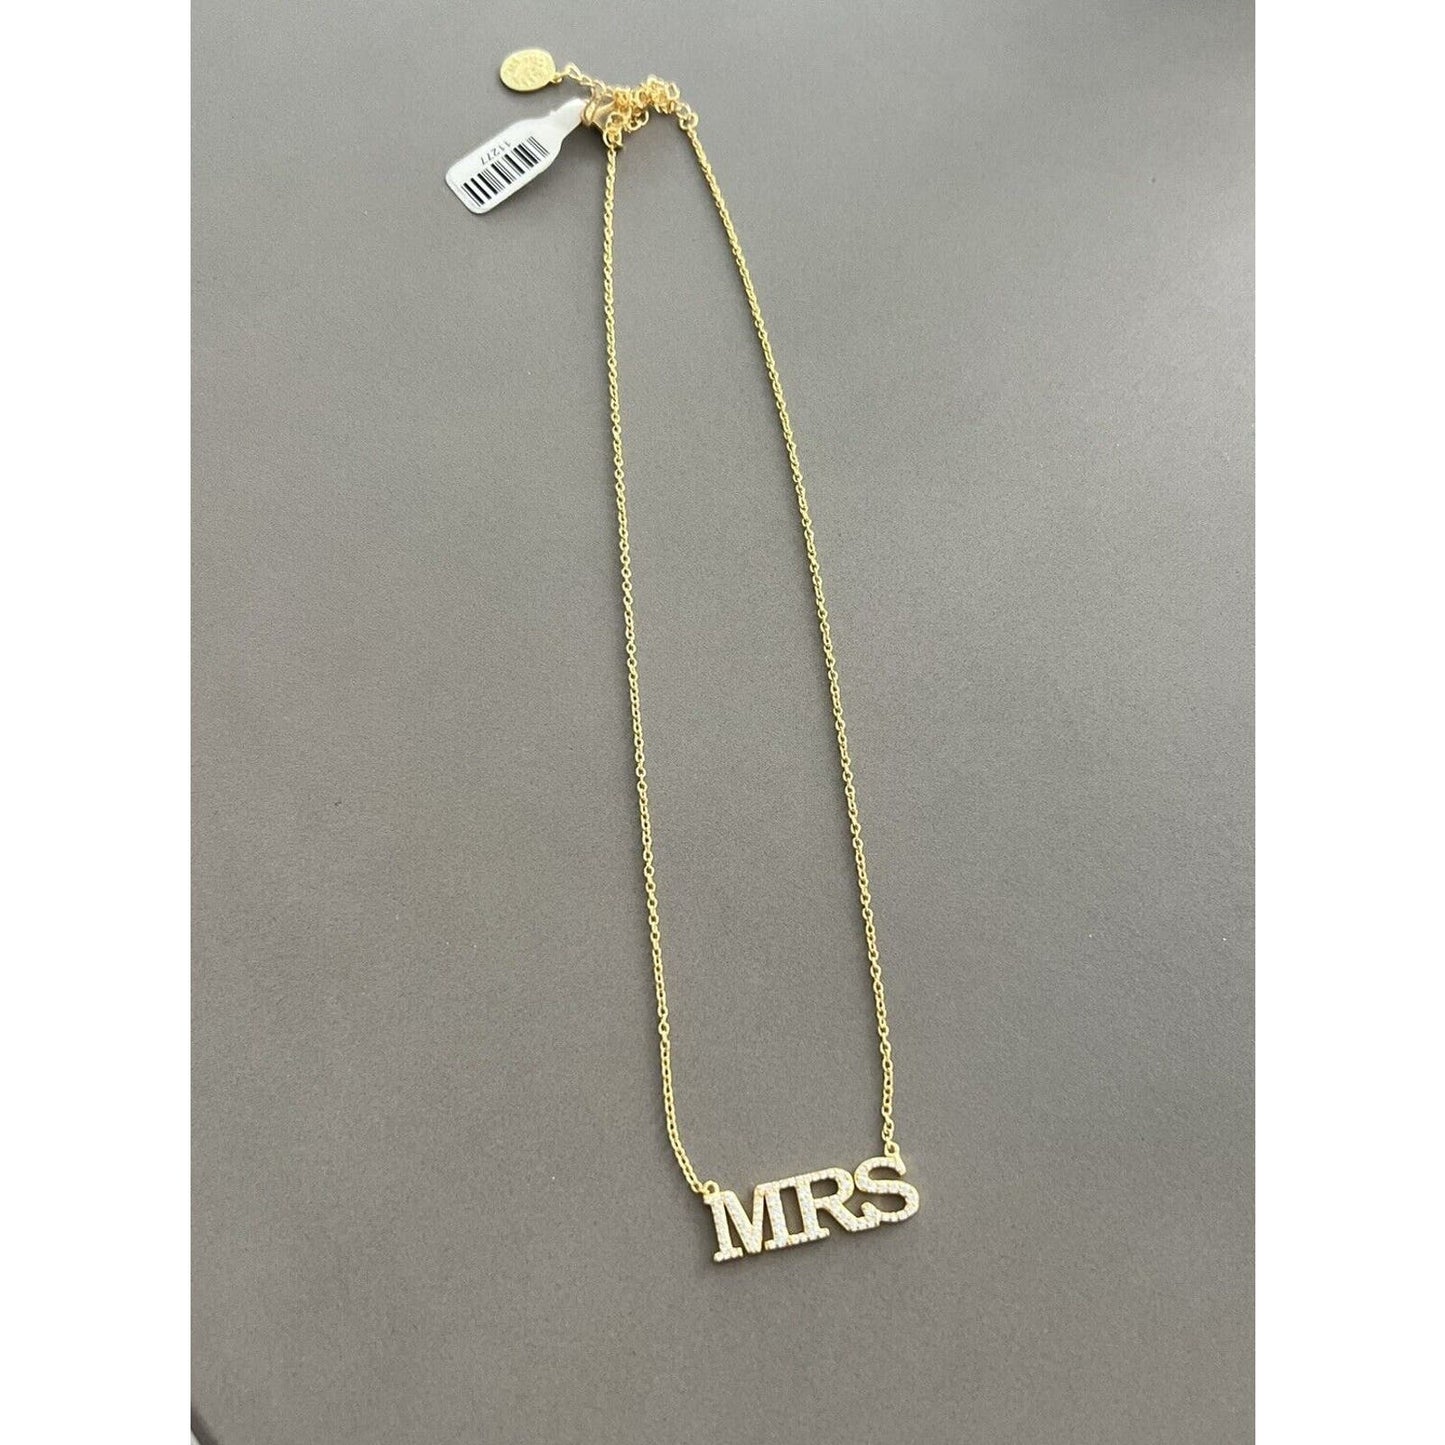 Anna Zuckerman Kate 06 MRS Necklace Gold plated Sterling Honeymoon New with Tag